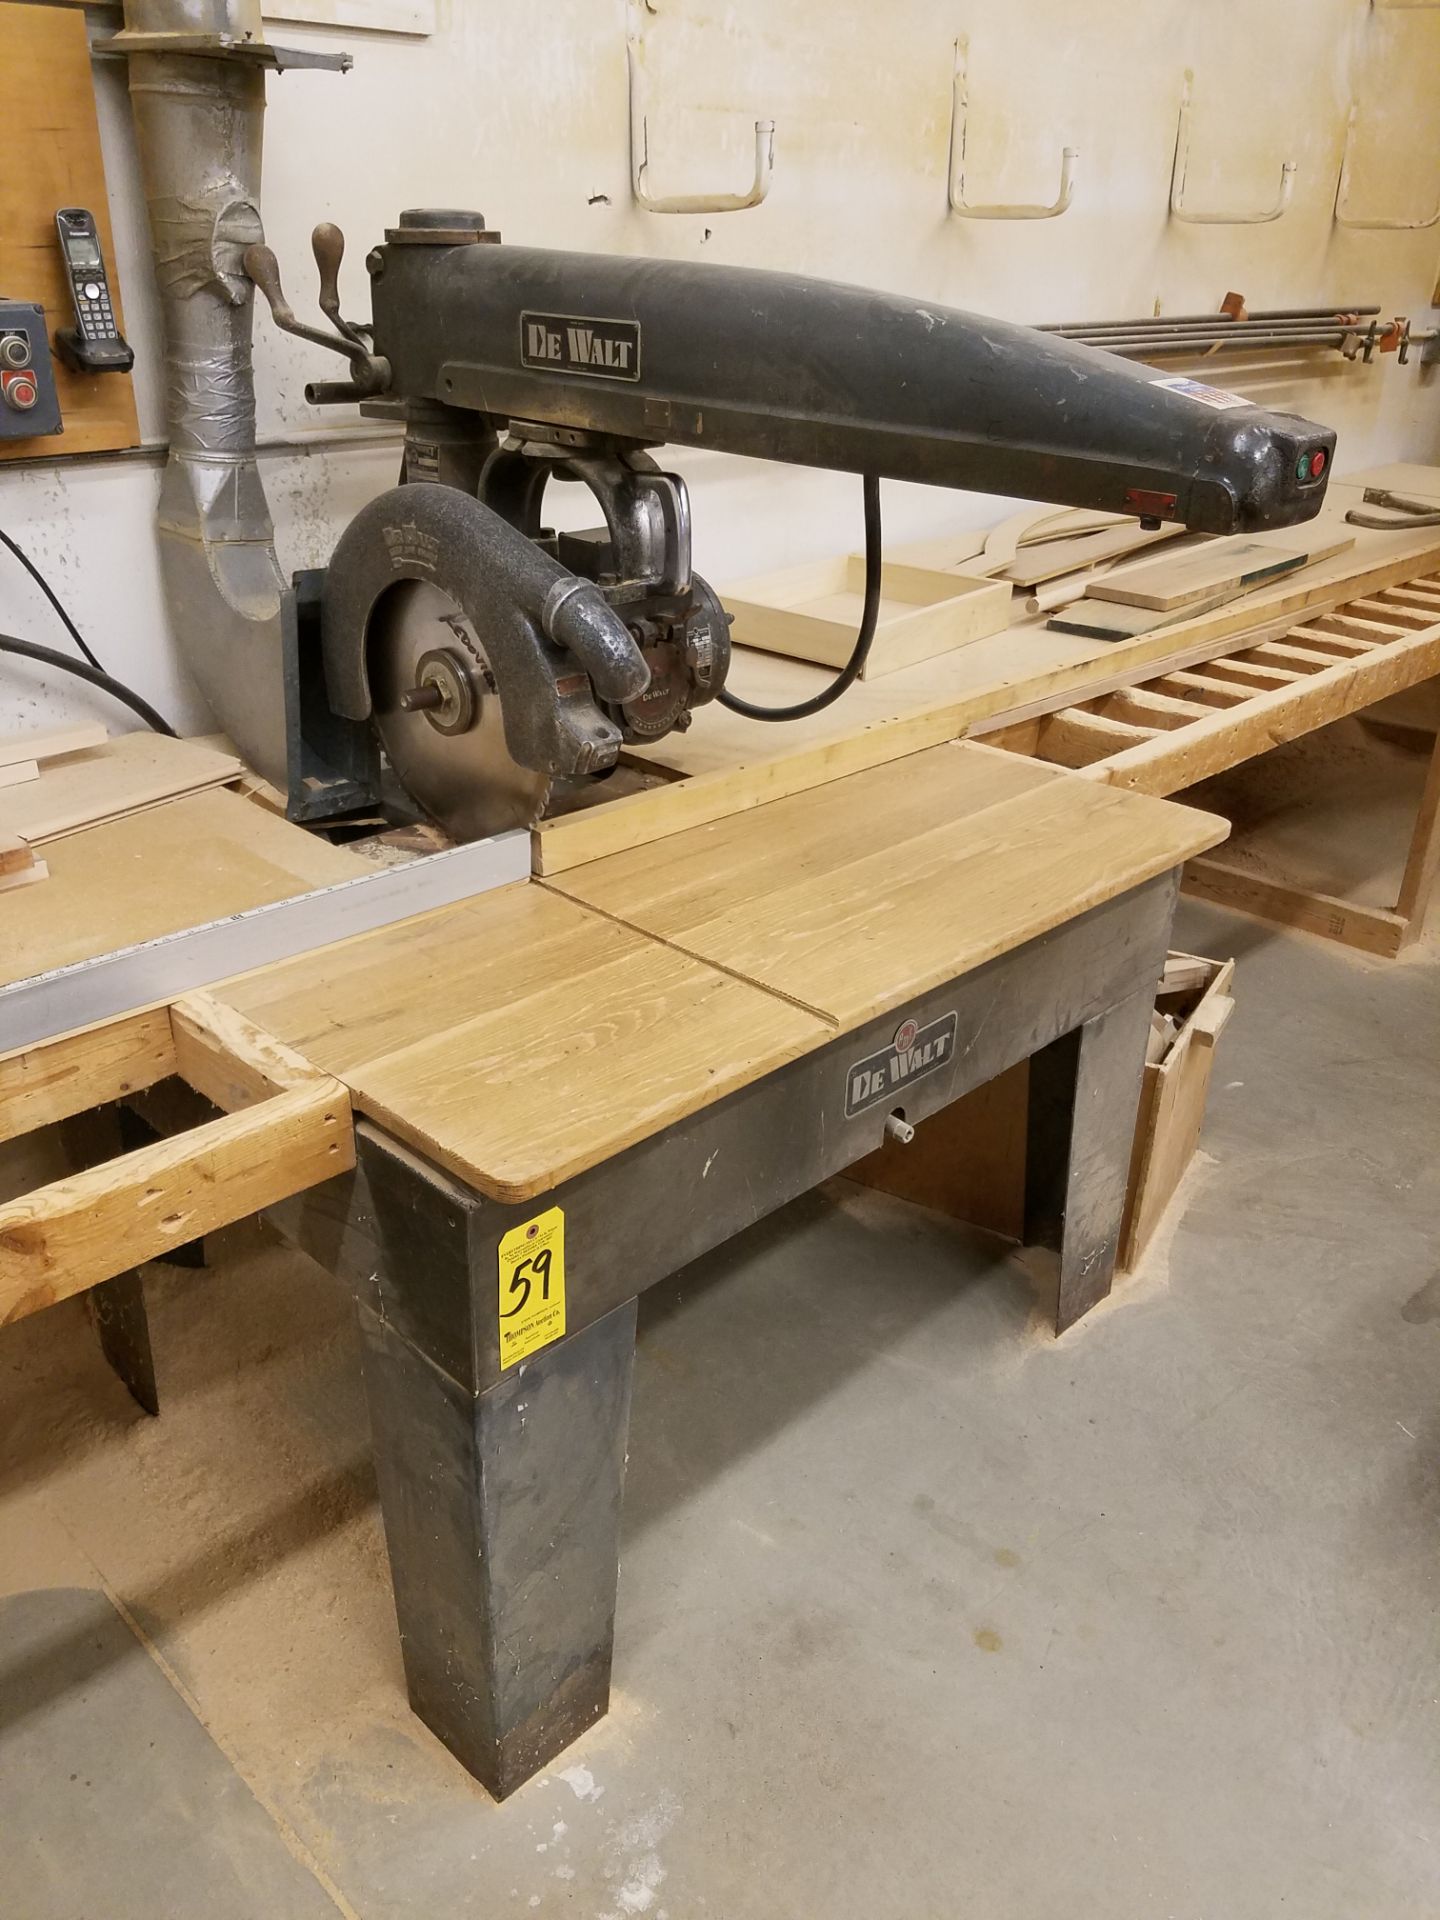 Dewalt Model 6E Radial Arm Saw, s/n 125789, 7.5 HP, Infeed and Outfeed Tables, Loading Fee $200.00